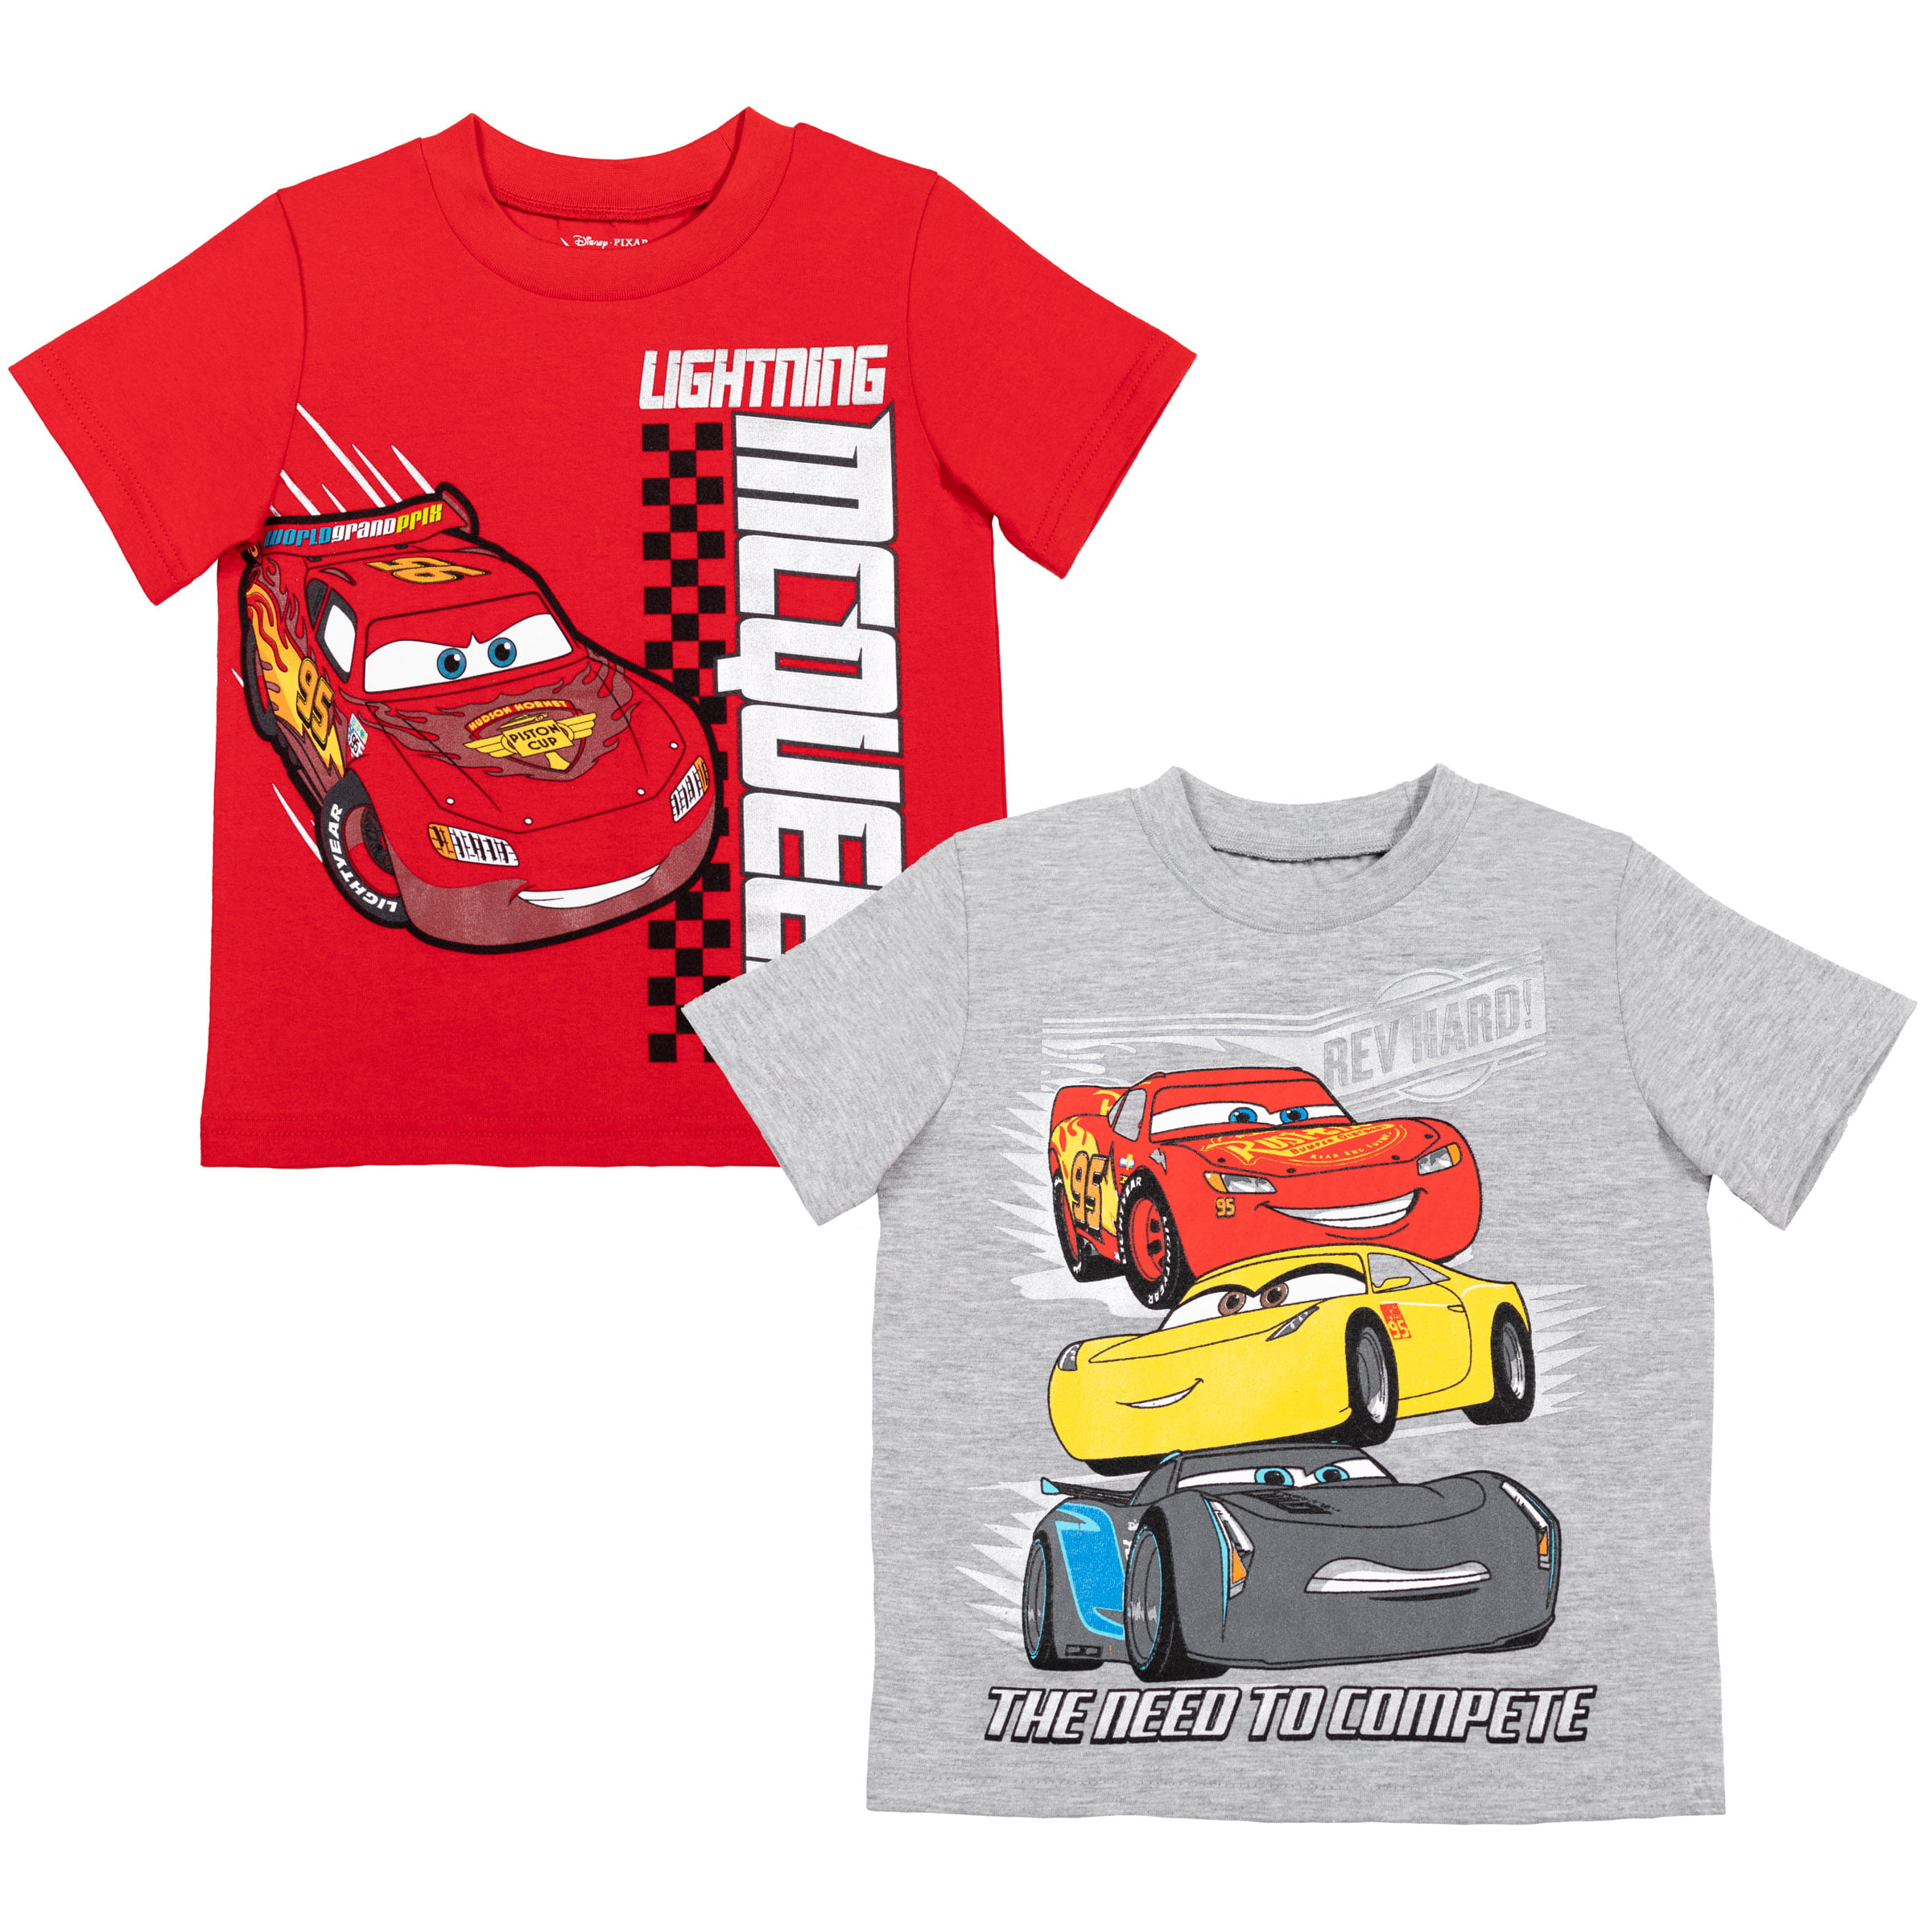 Disney Cars Lightning McQueen Boys T-shirt New Charcoal Gray Officially Licensed 